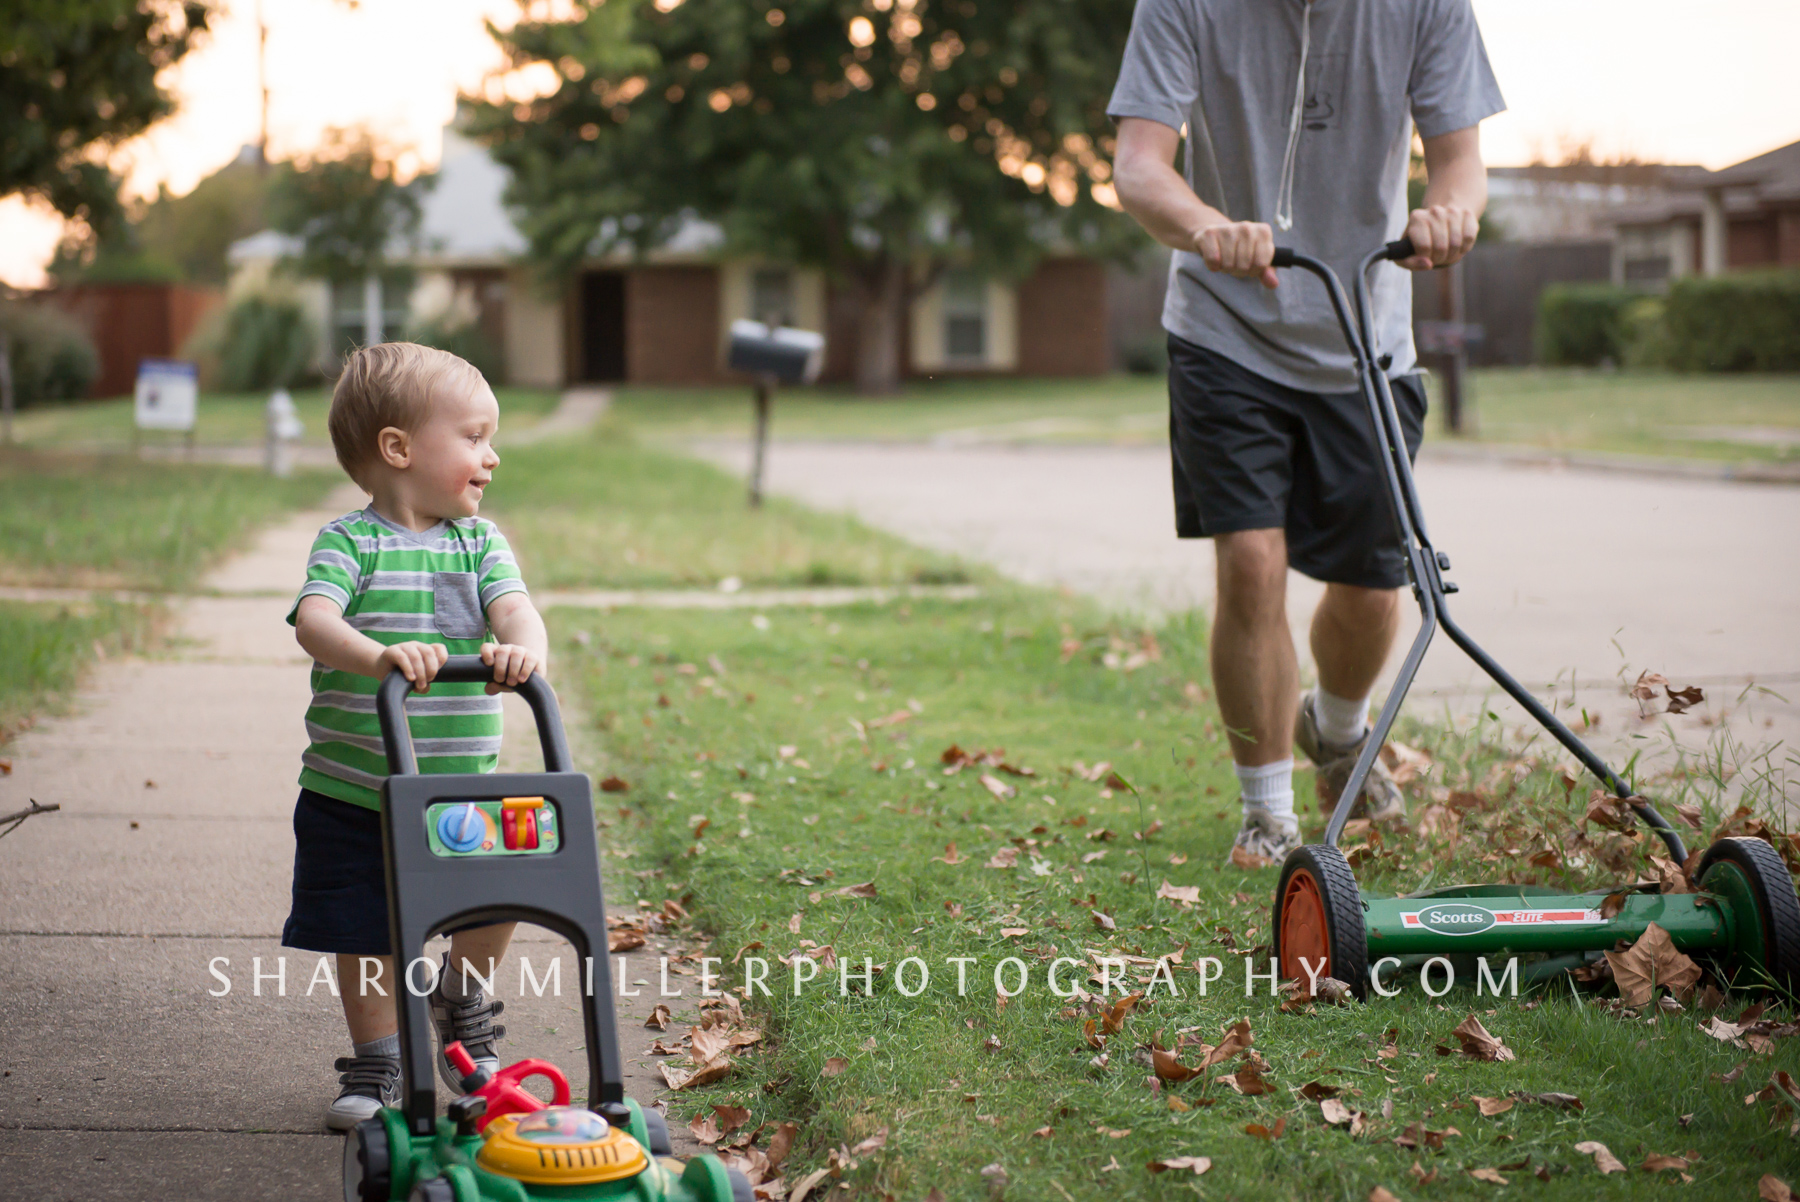 storytelling photography showing a young boy pushing toy lawn mower next to daddy's reel lawn mower